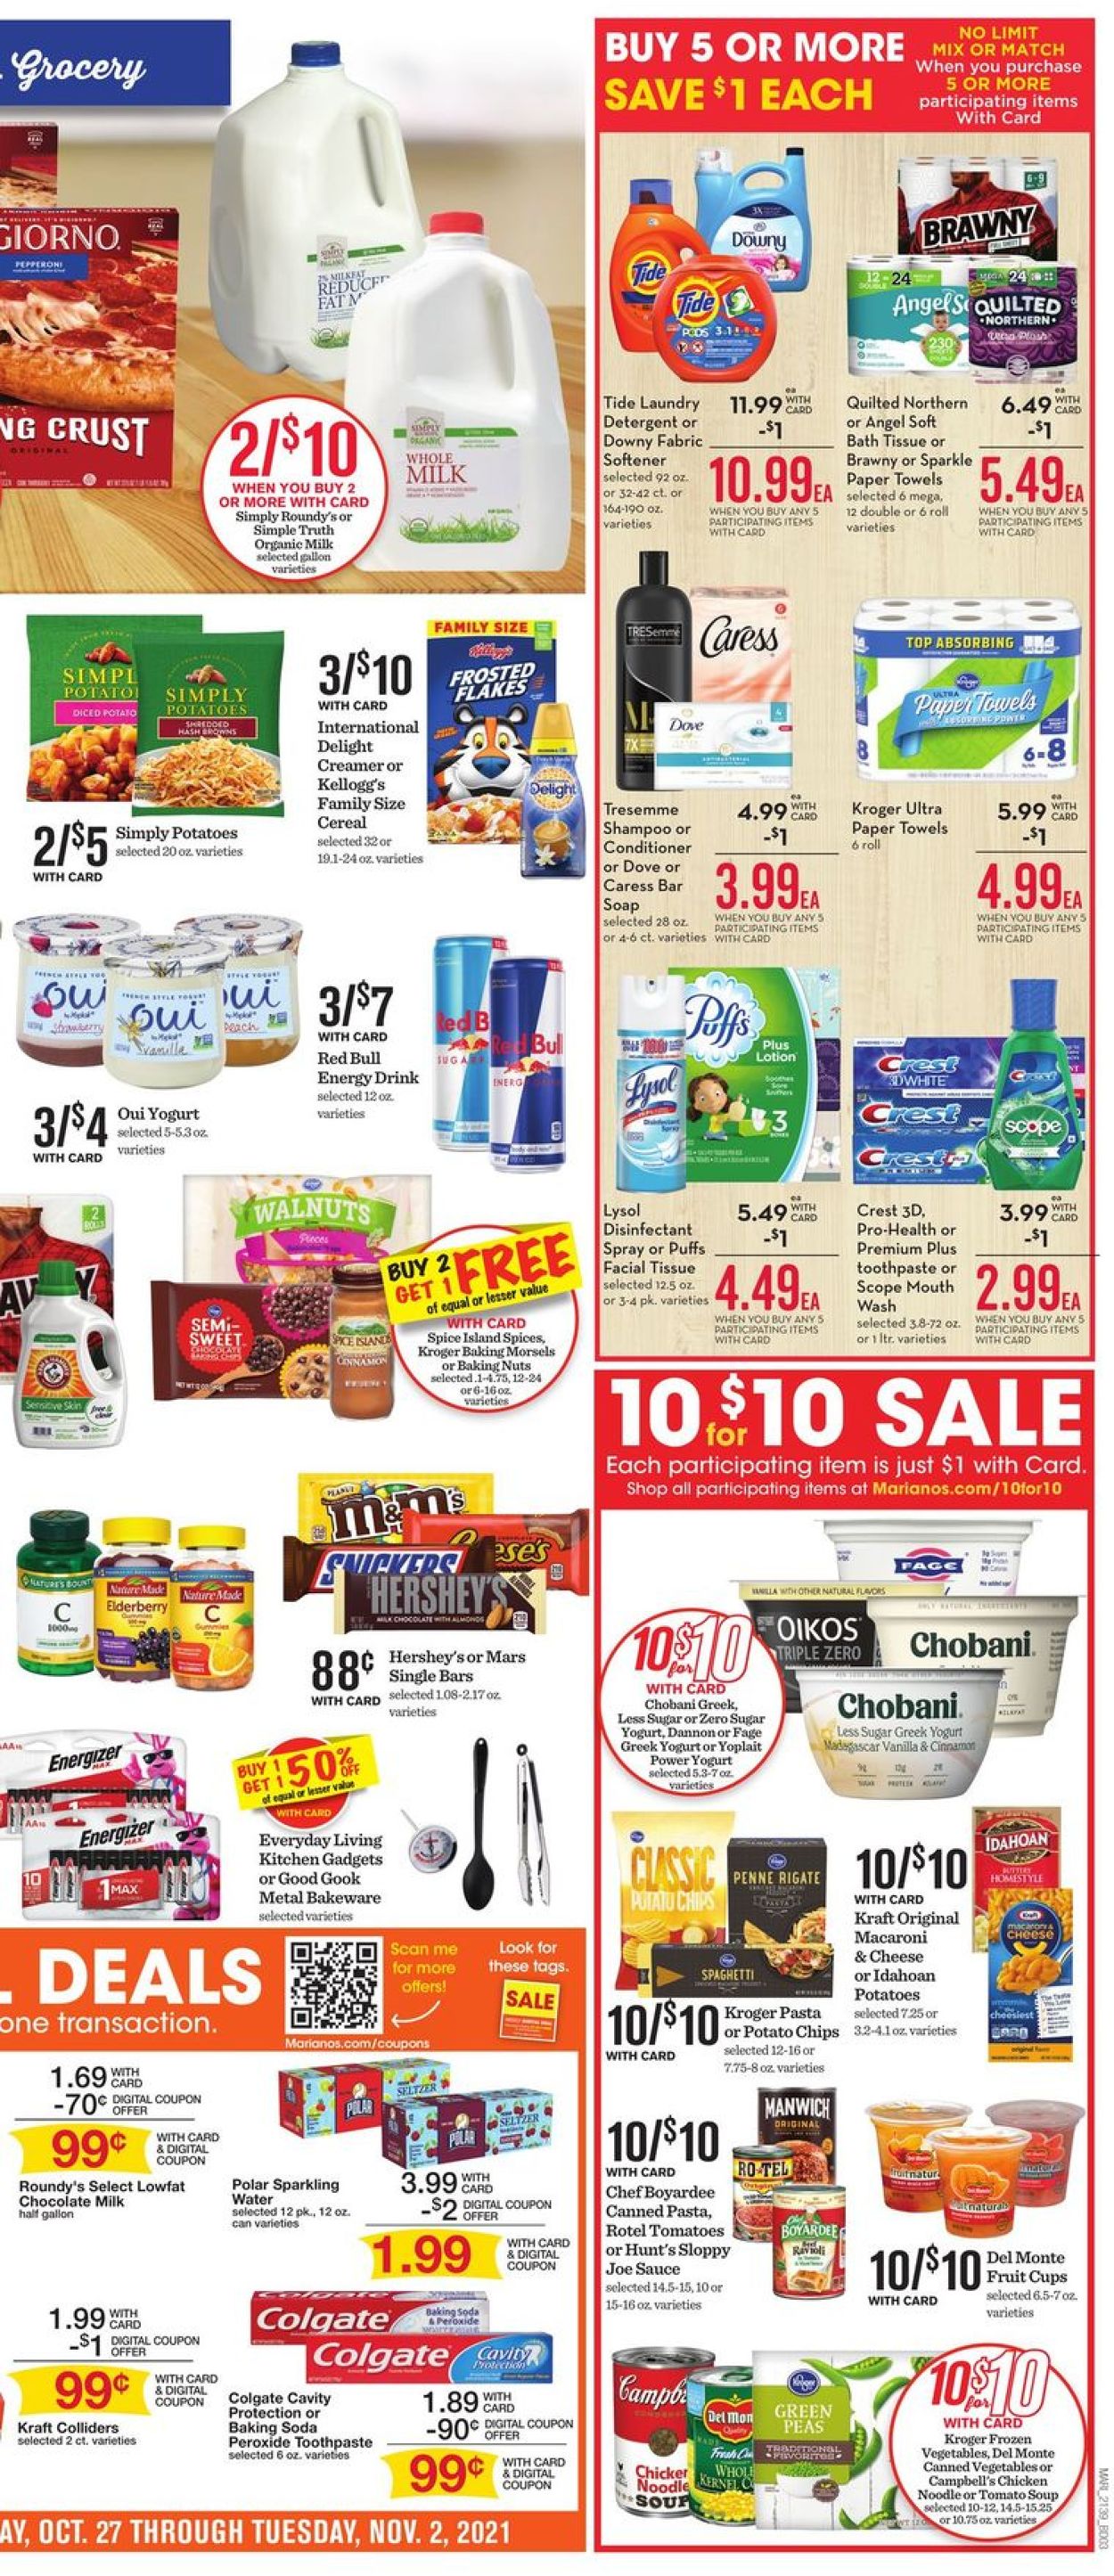 Mariano’s Ad from 10/27/2021